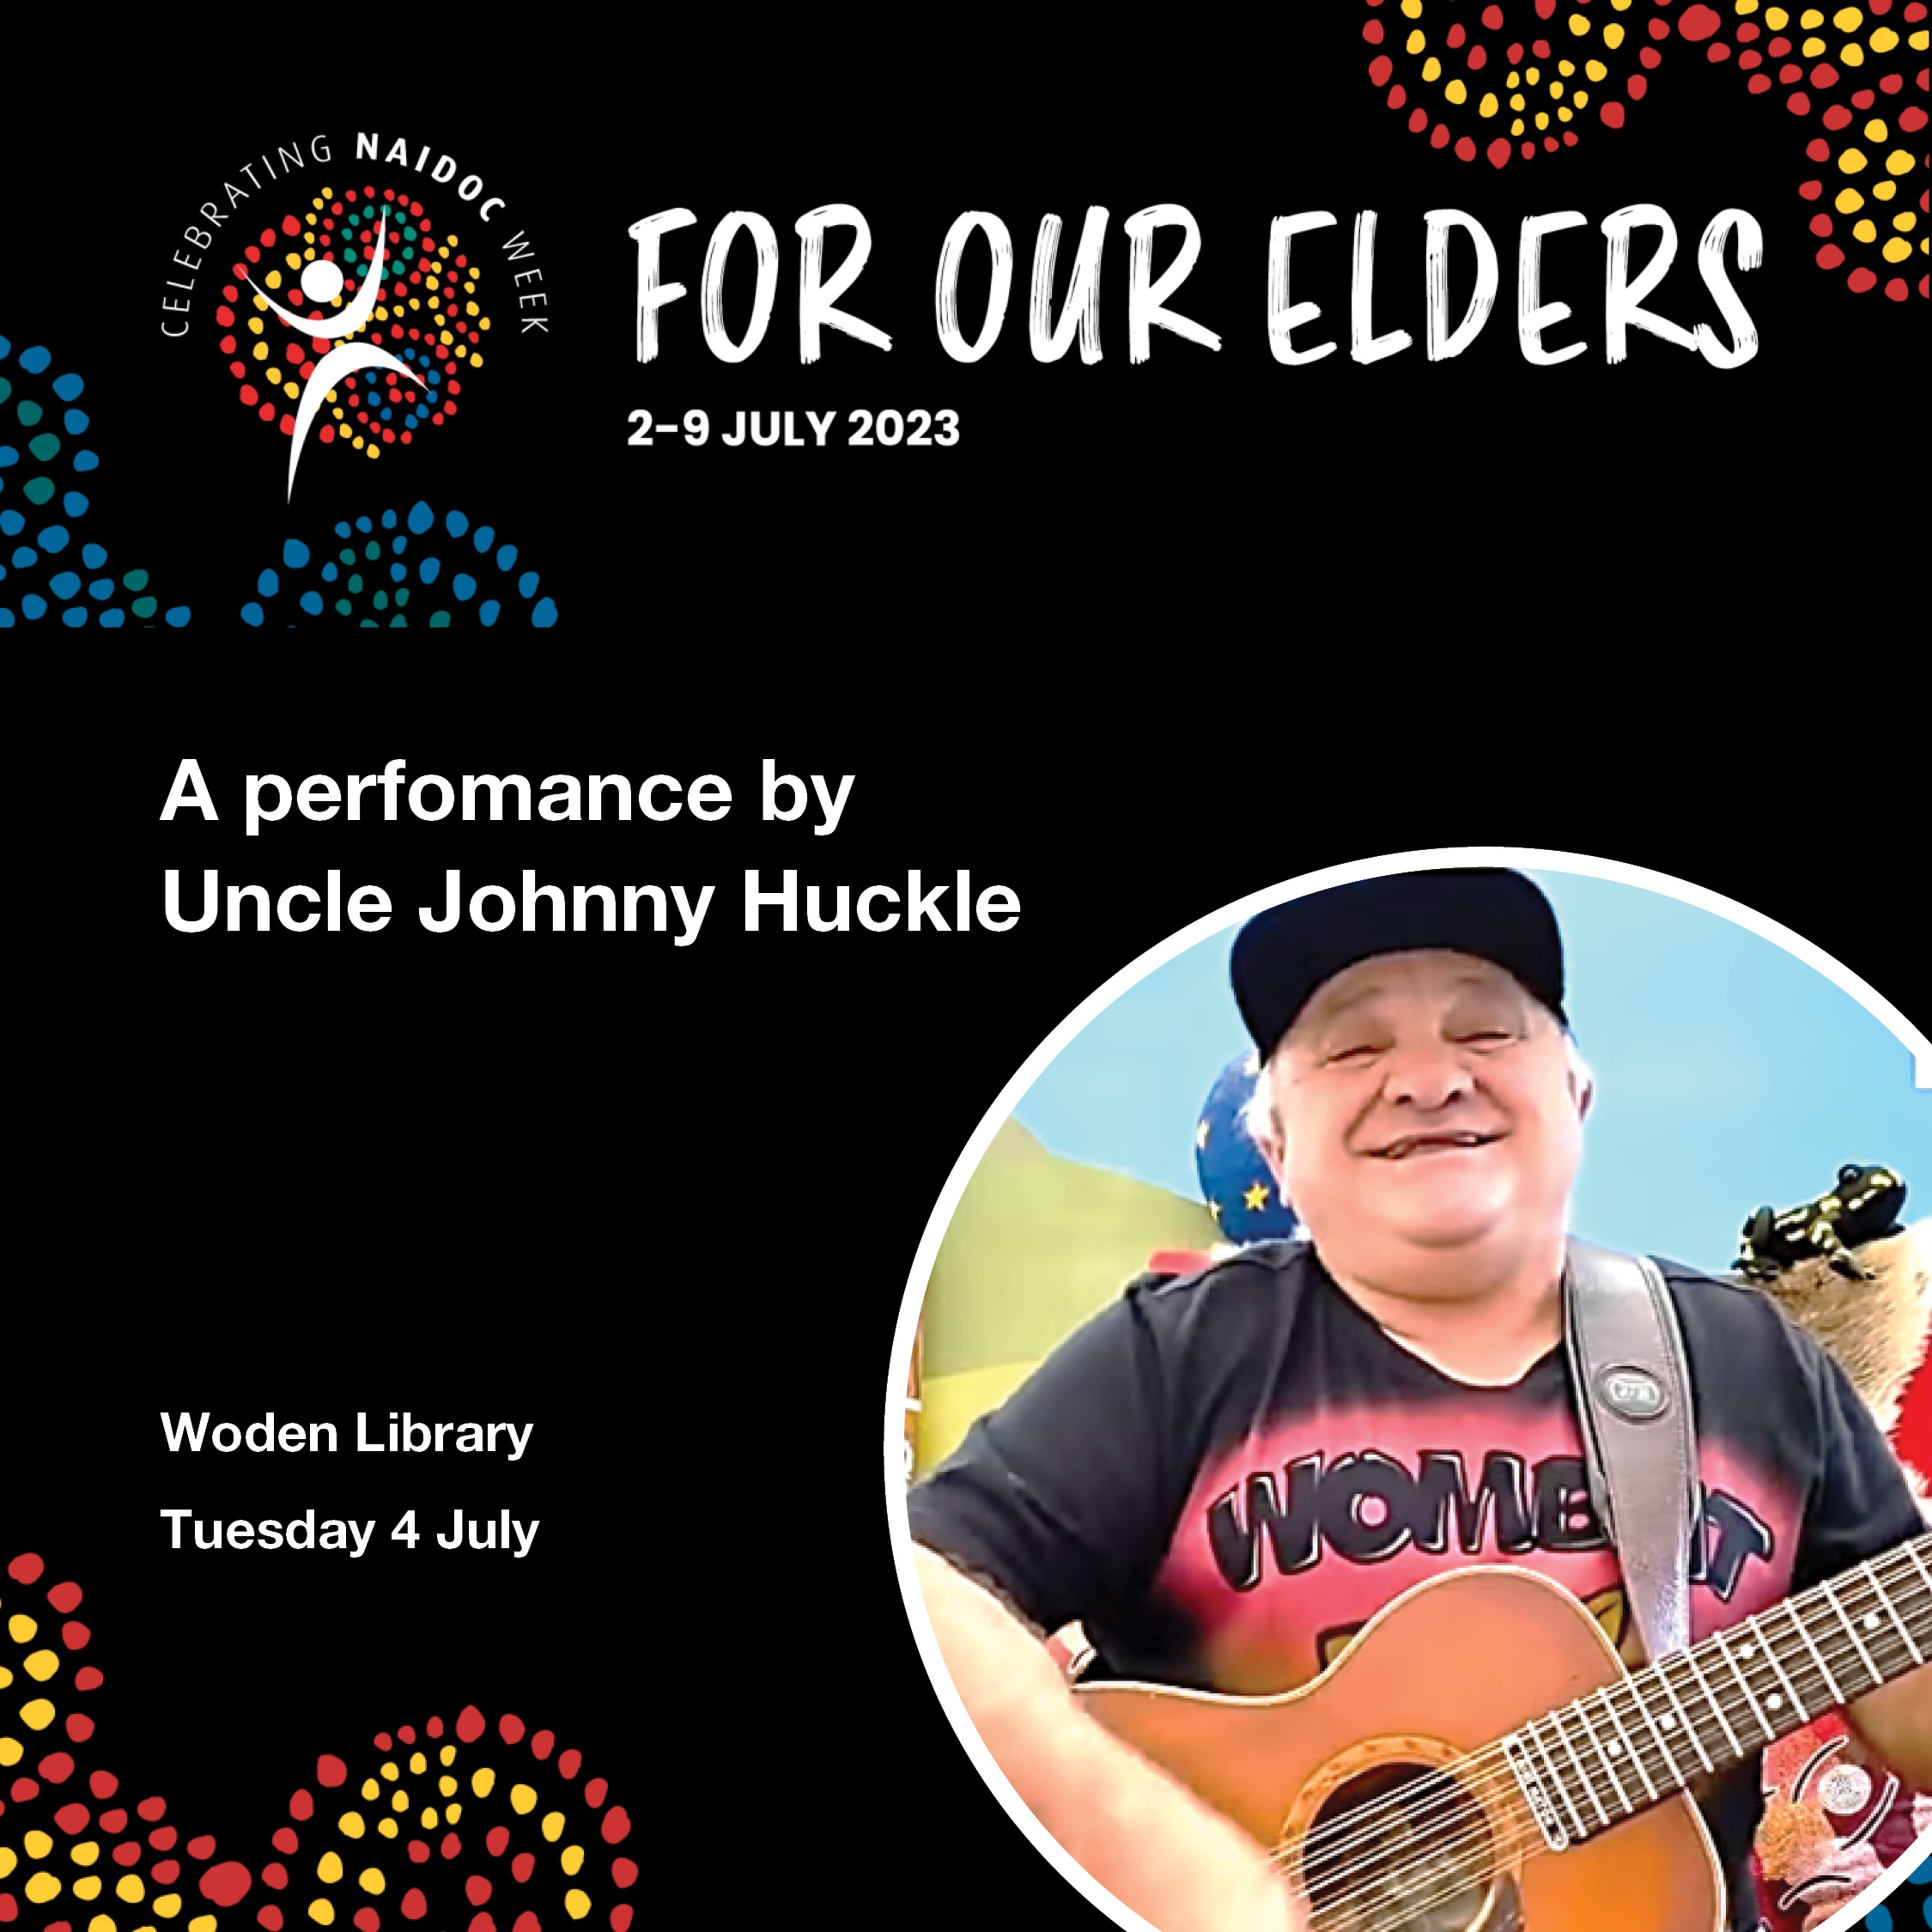 Performance by Uncle Johnny Huckle